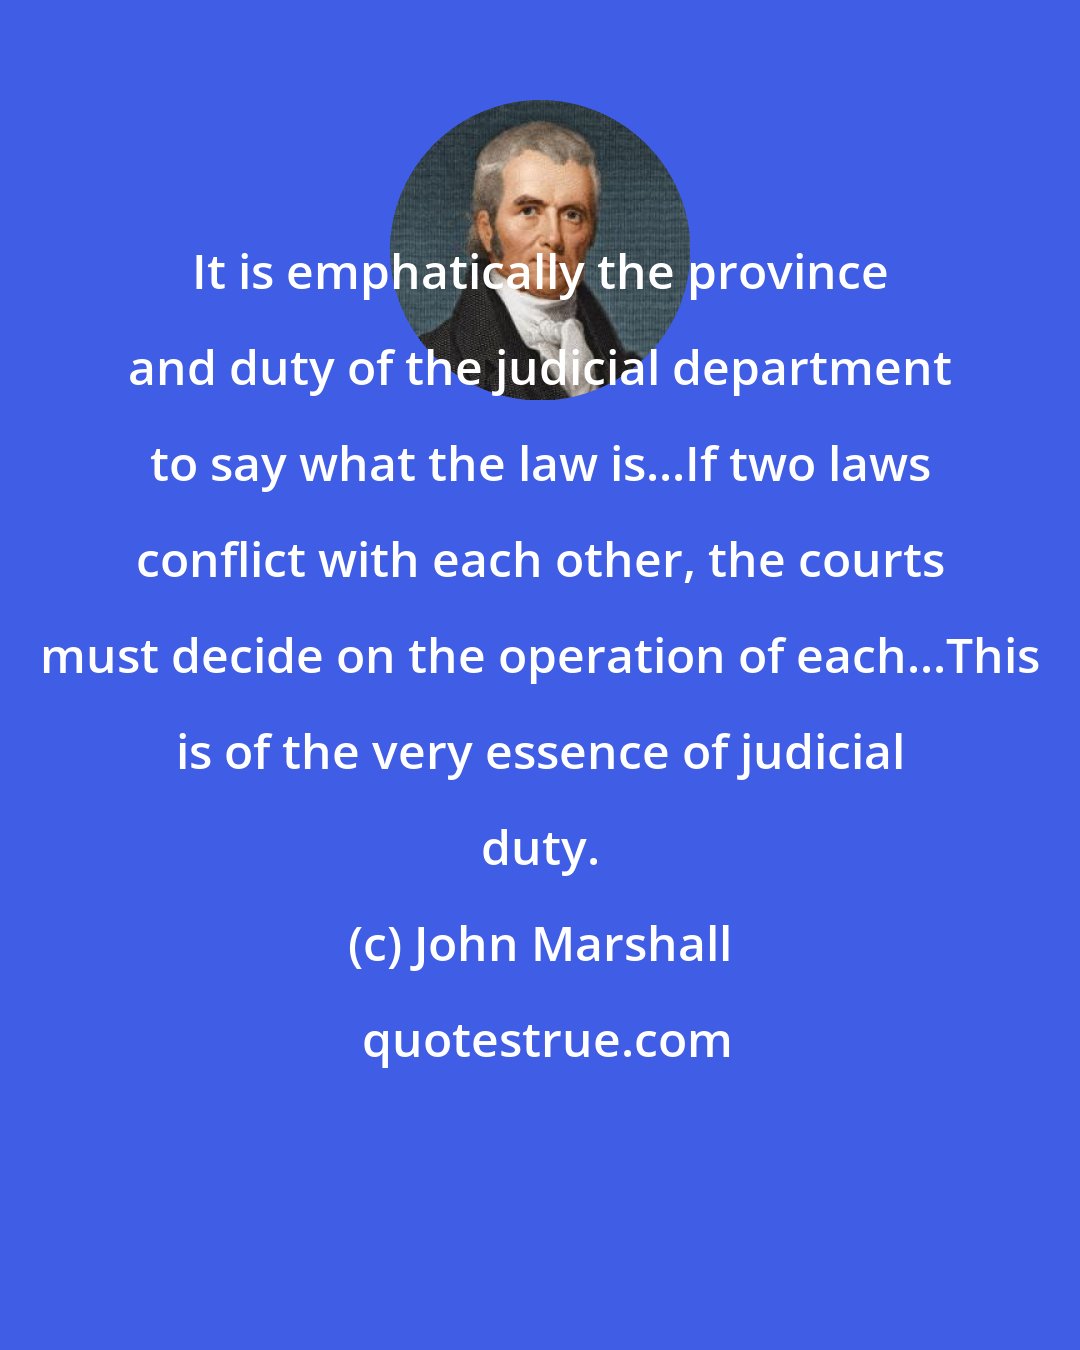 John Marshall: It is emphatically the province and duty of the judicial department to say what the law is...If two laws conflict with each other, the courts must decide on the operation of each...This is of the very essence of judicial duty.